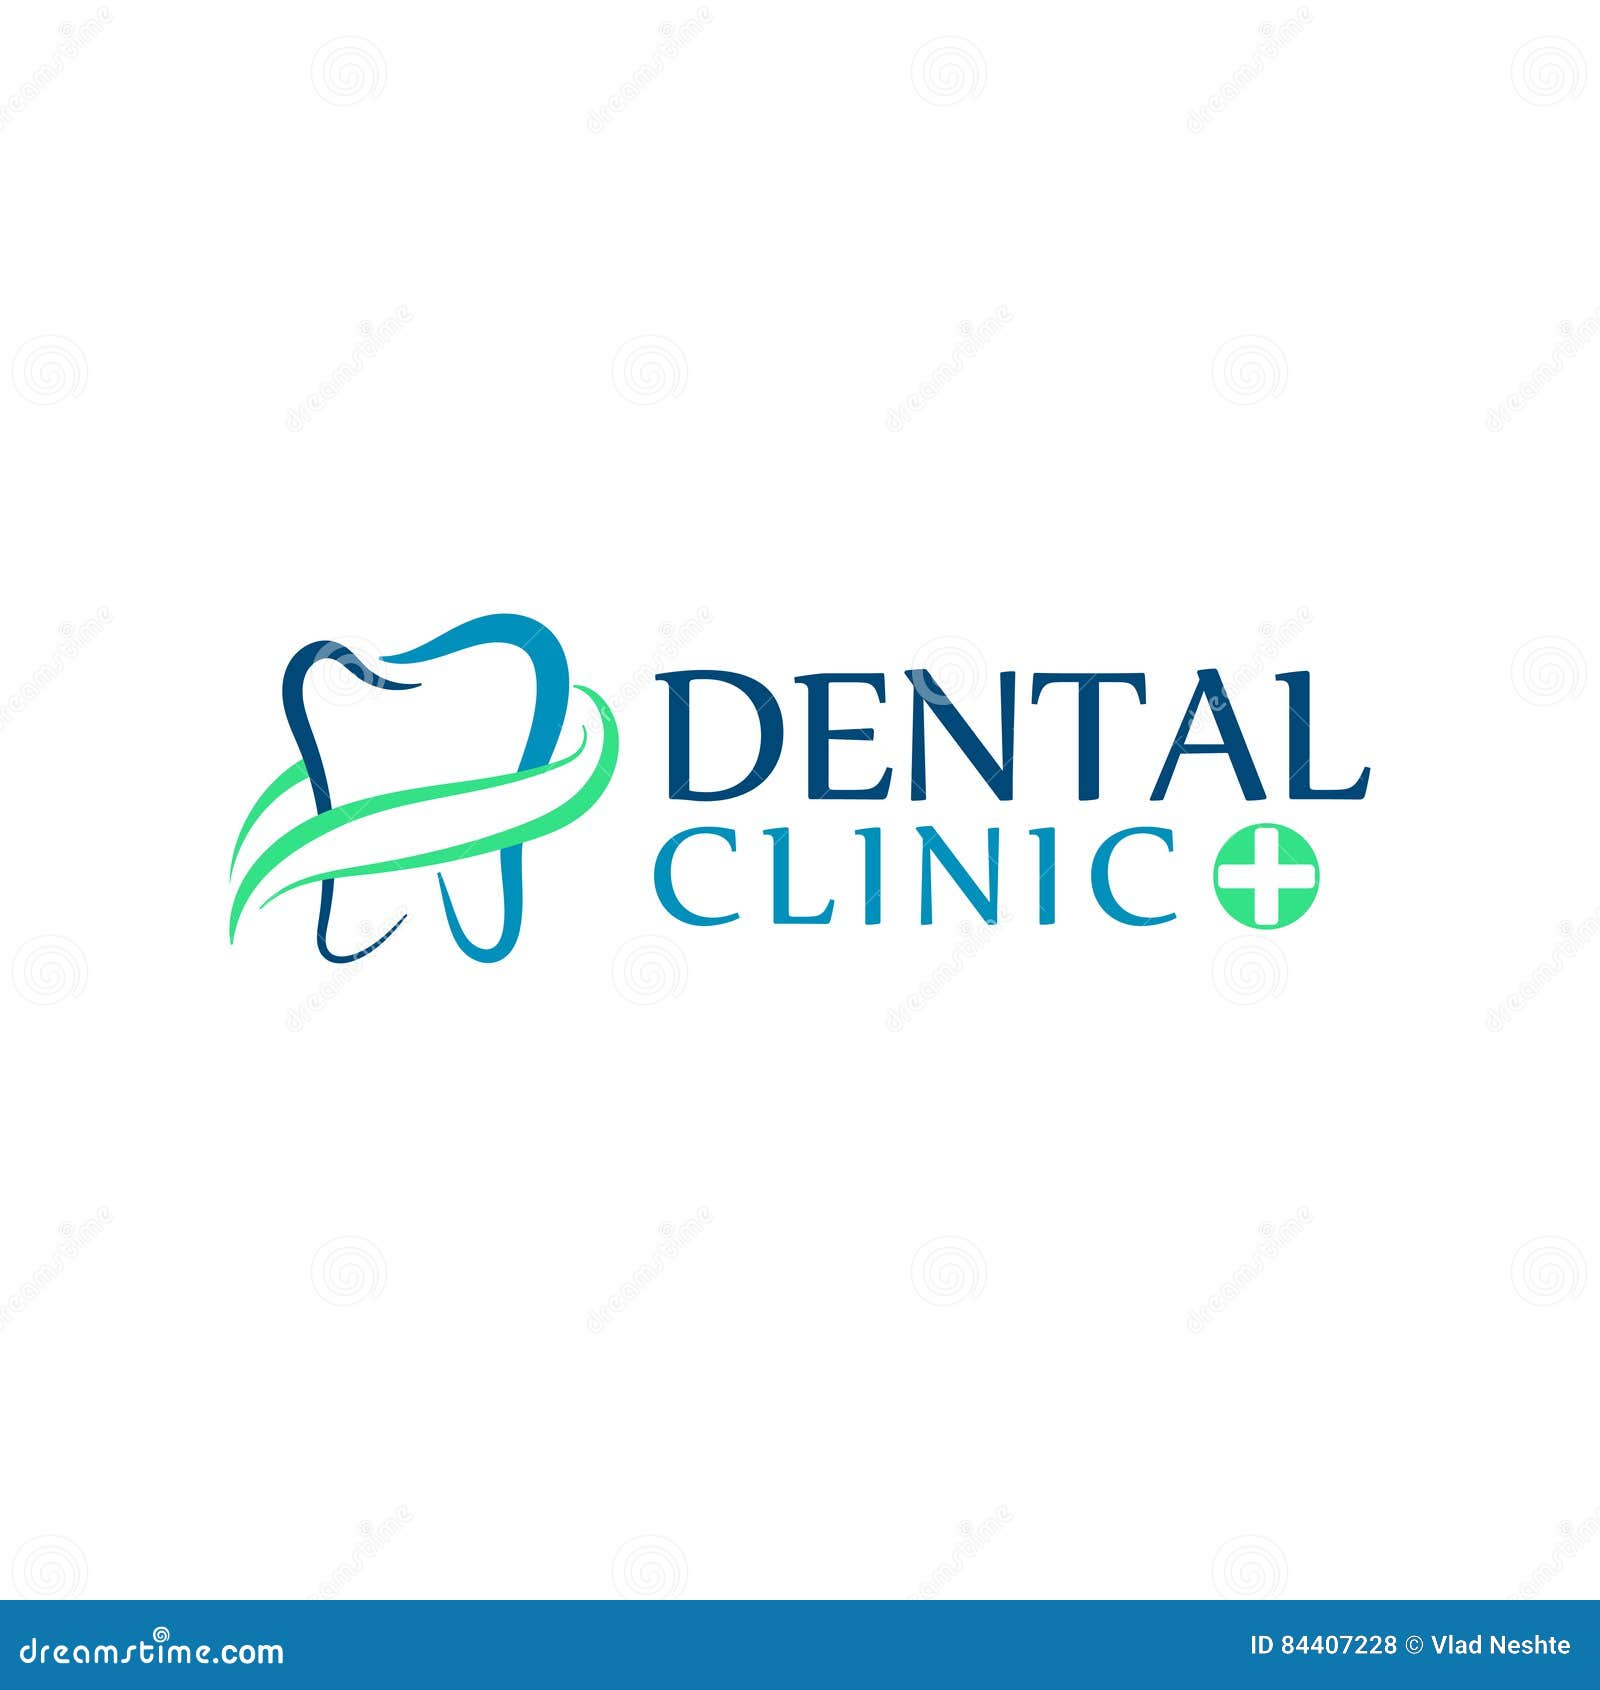 logo-dental-care-clinic-dentistry-kids-teeth-abstract-icons-can-be-used-as-dentist-stomatology-health-concept-84407228.jpg